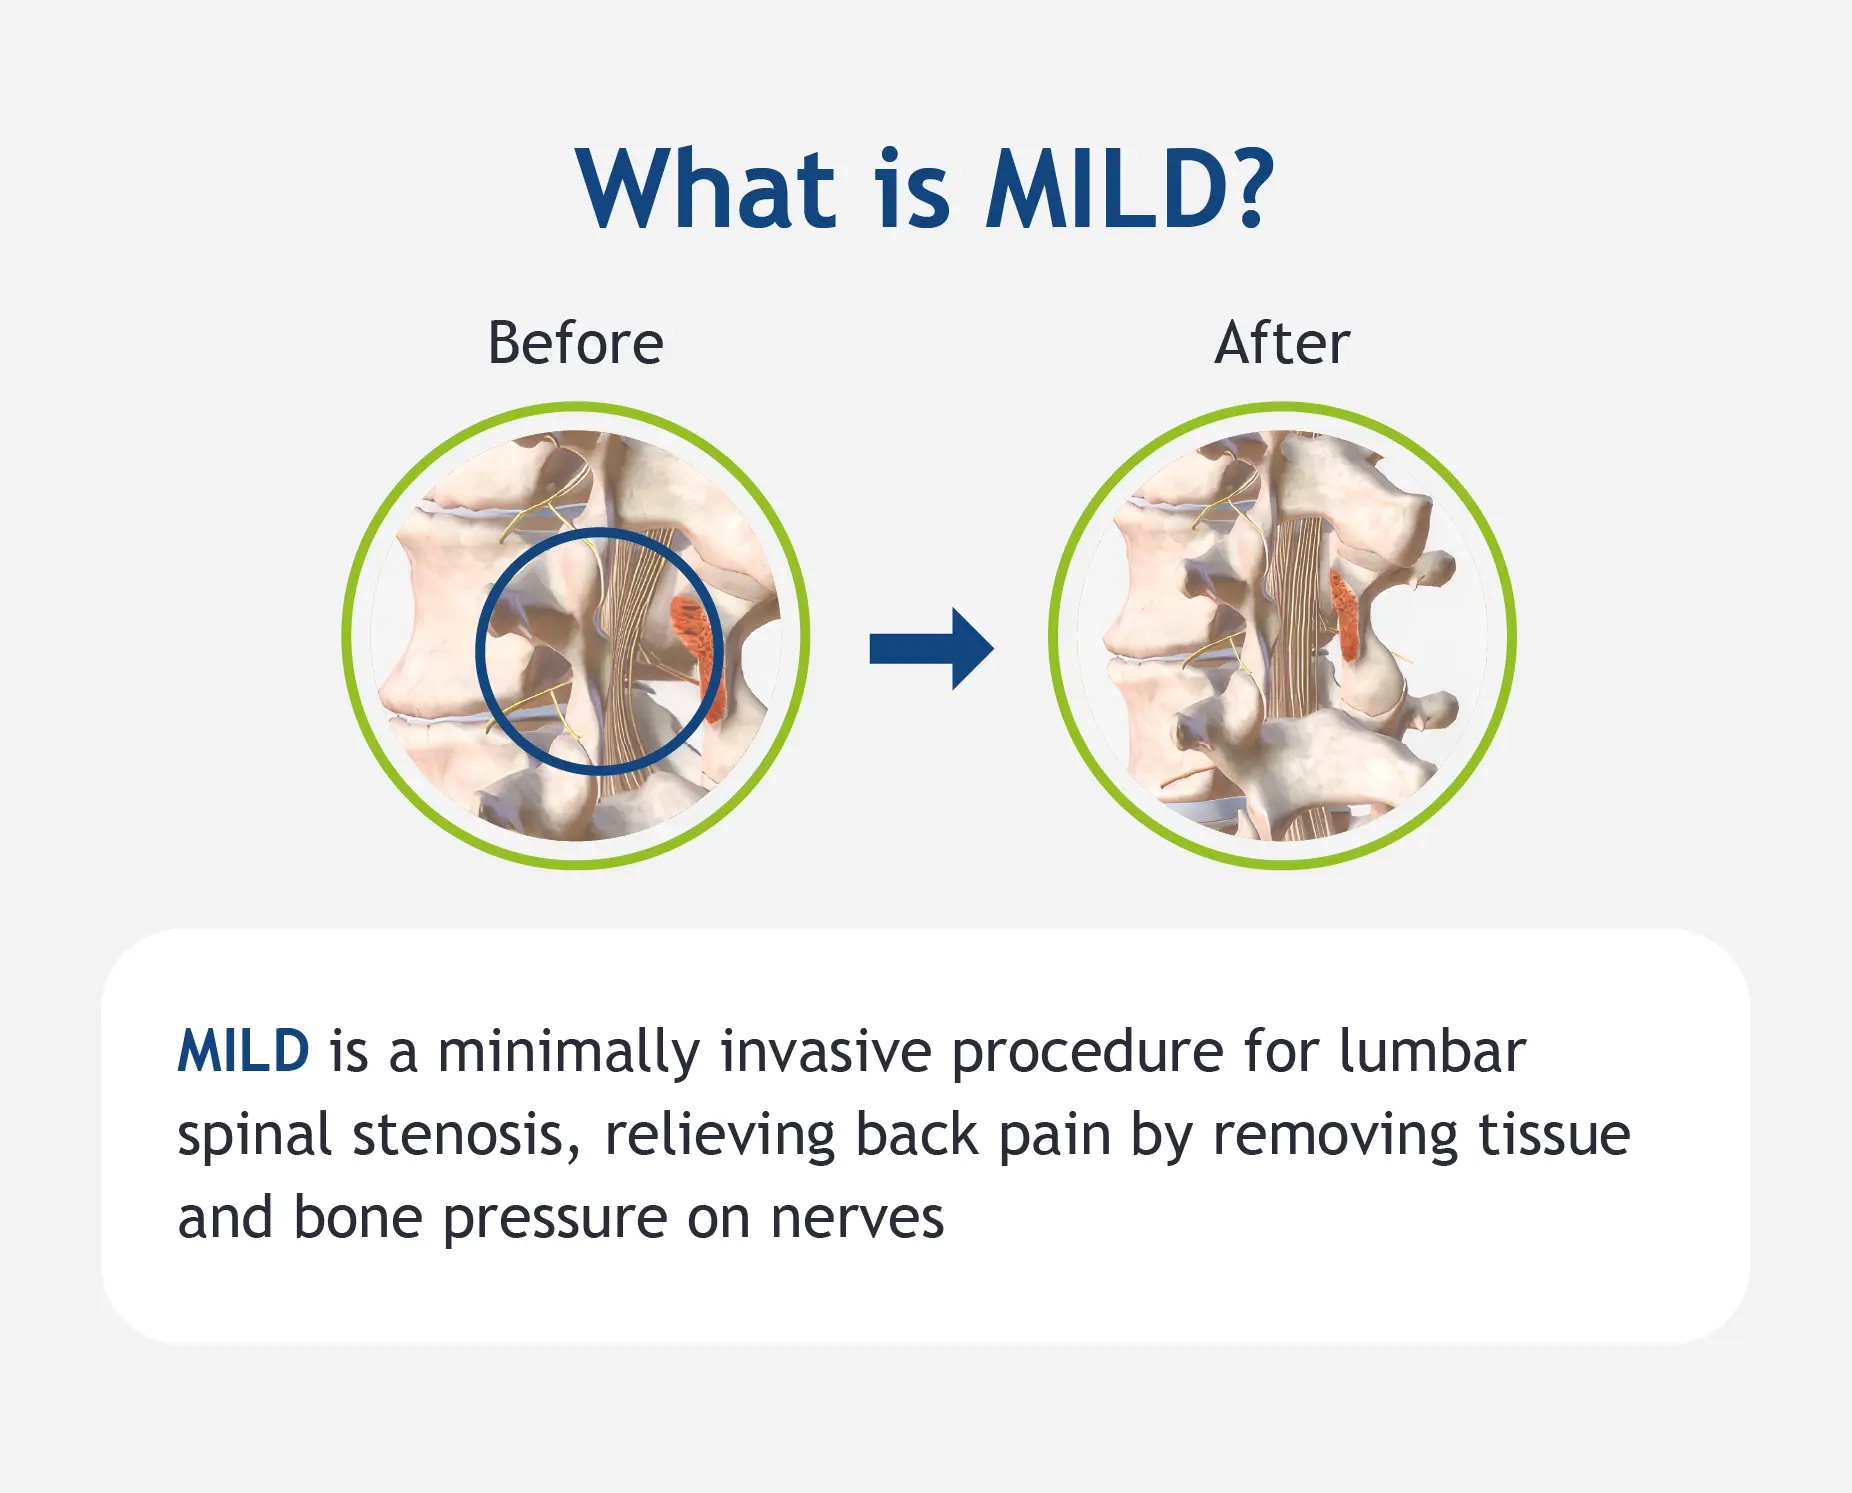 An infographic defining the MILD procedure.